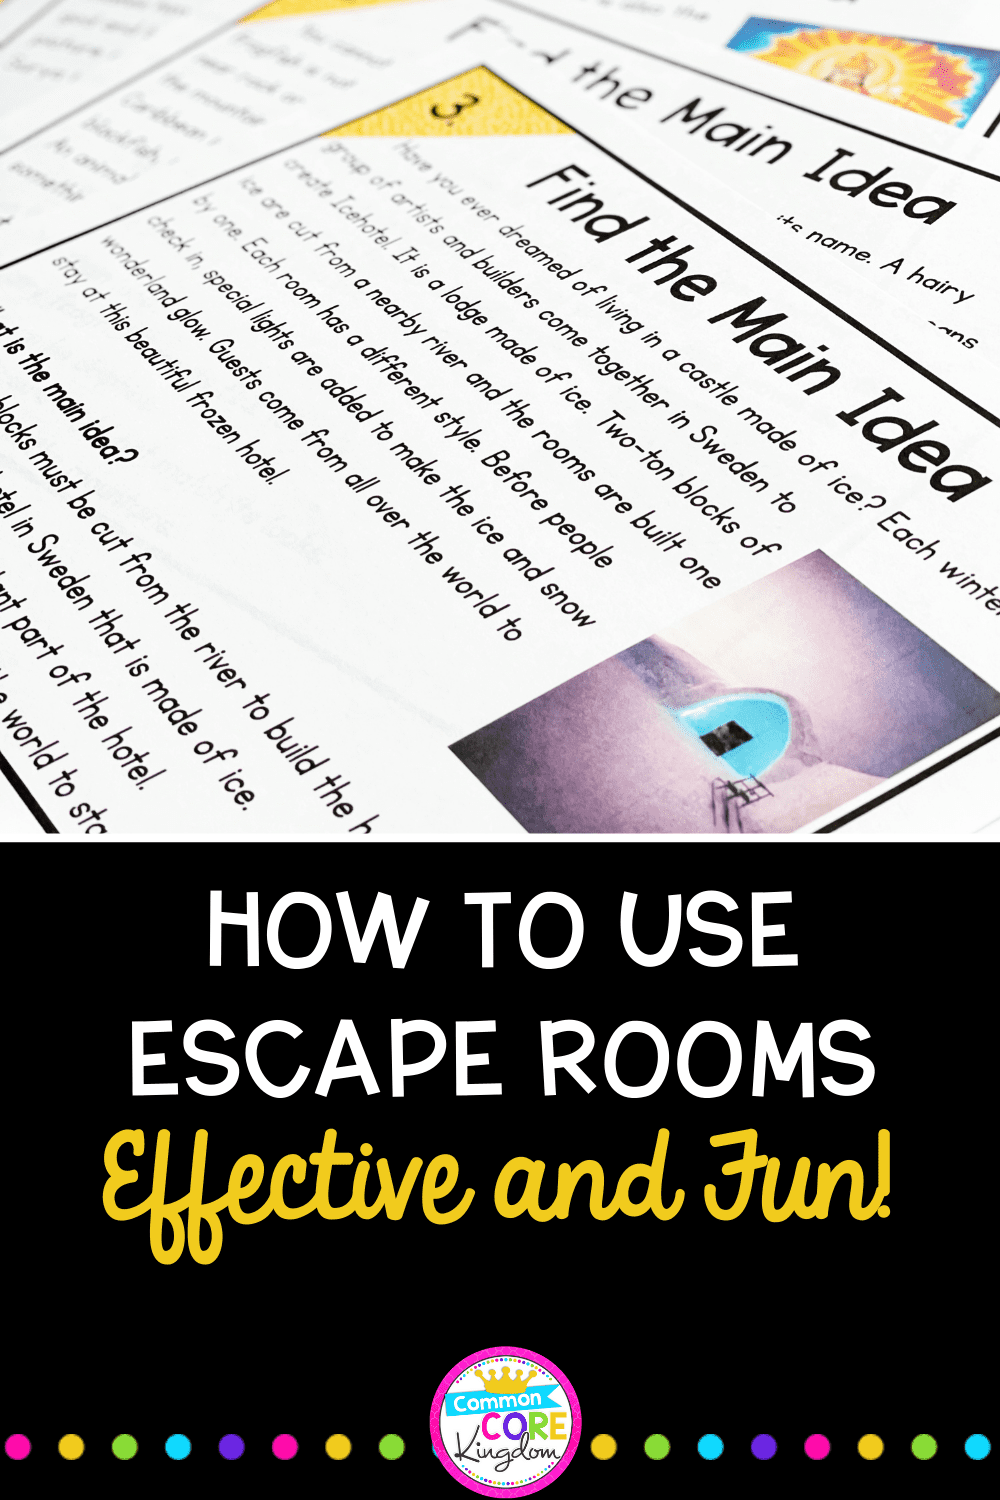 How to use escape rooms to review content blog cover showing image of printable teaching resource and text